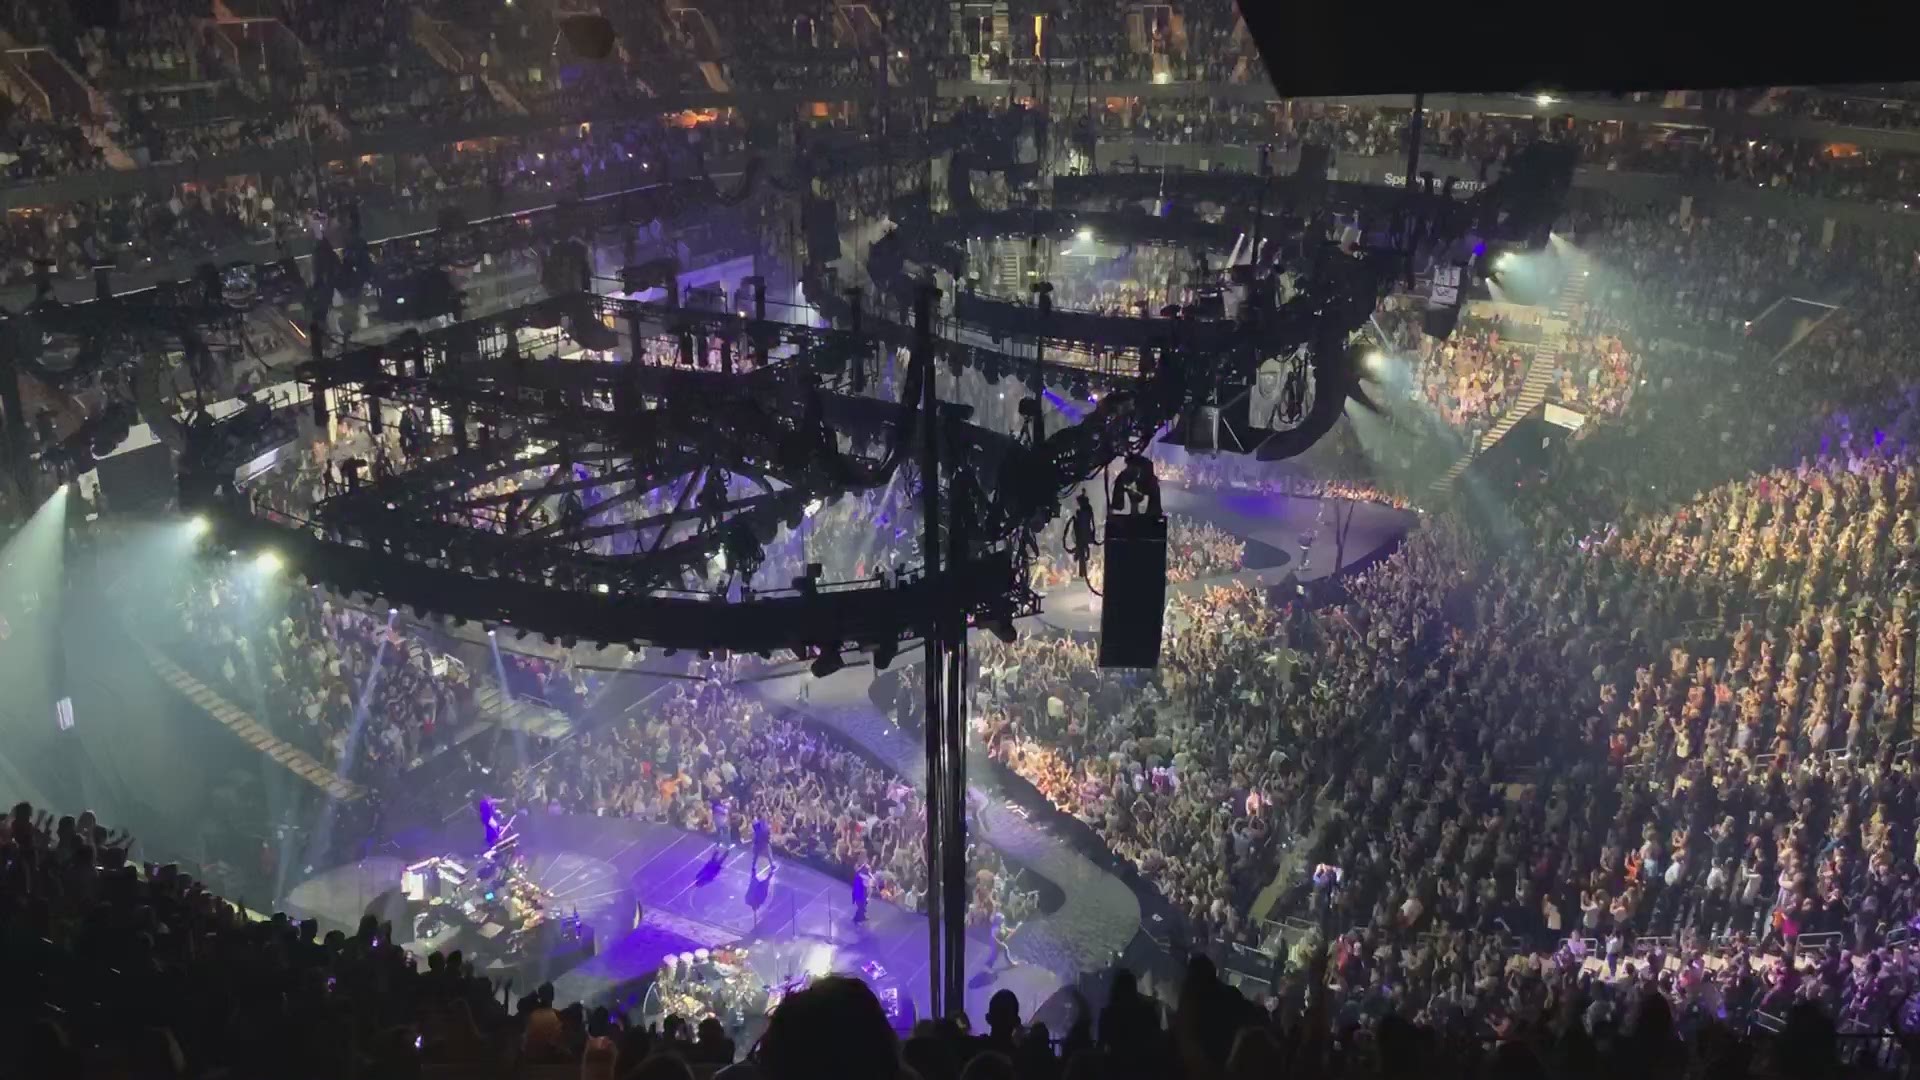 Justin Timberlake live in concert in Charlotte